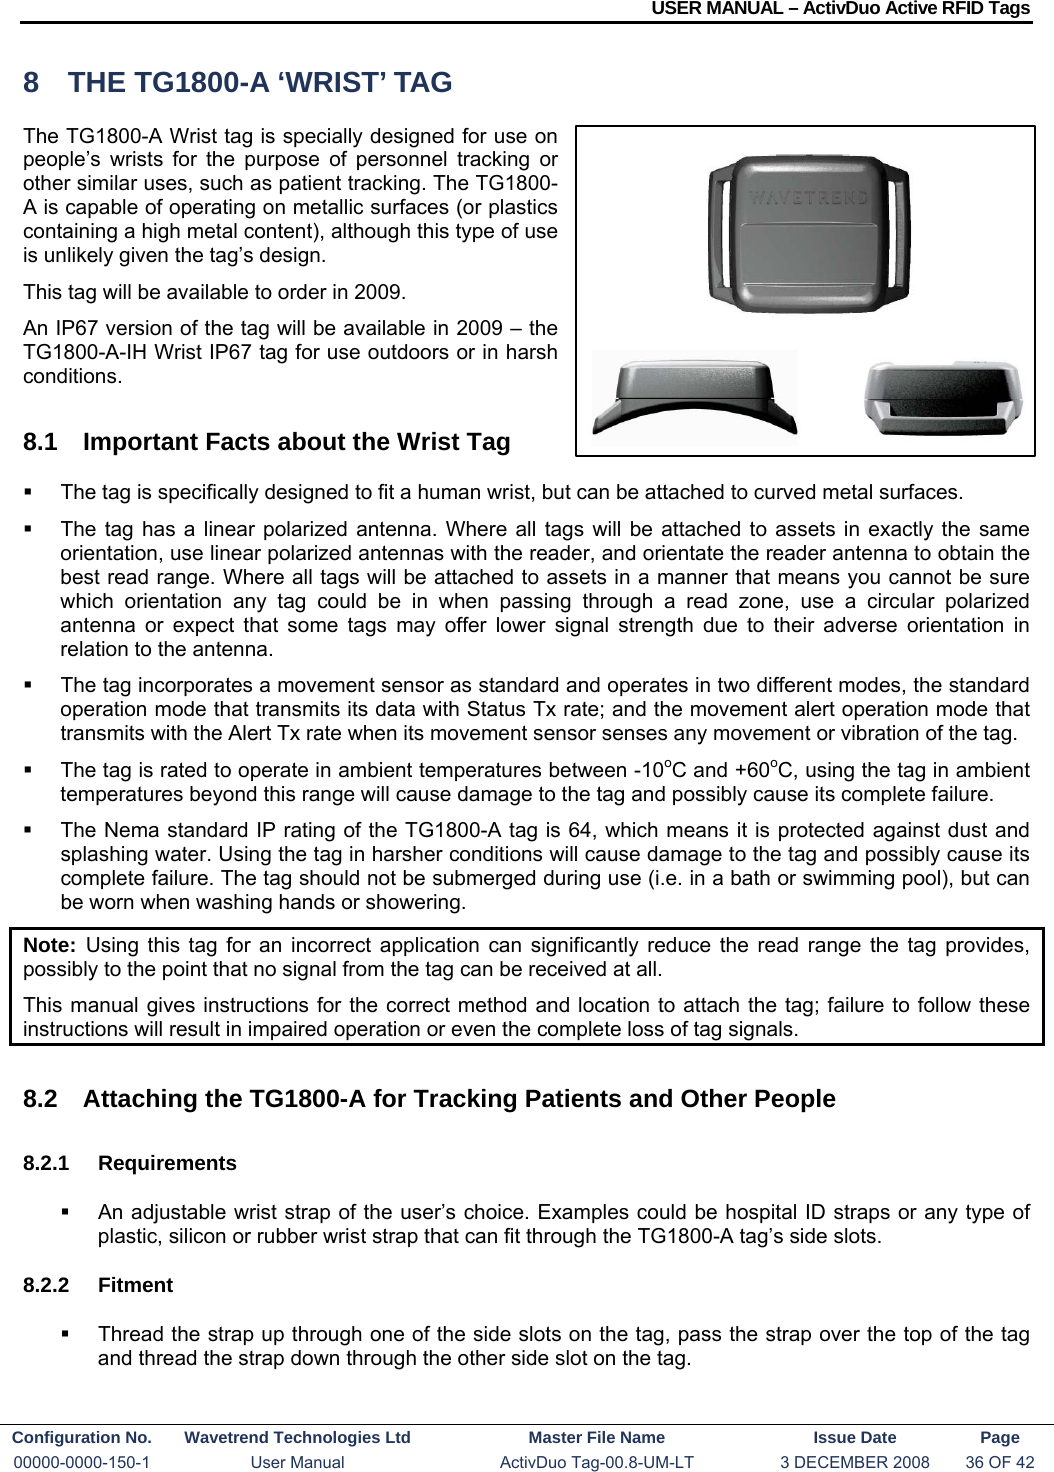 USER MANUAL – ActivDuo Active RFID Tags Configuration No.  Wavetrend Technologies Ltd  Master File Name   Issue Date  Page 00000-0000-150-1  User Manual  ActivDuo Tag-00.8-UM-LT  3 DECEMBER 2008  36 OF 42  8  THE TG1800-A ‘WRIST’ TAG The TG1800-A Wrist tag is specially designed for use on people’s wrists for the purpose of personnel tracking or other similar uses, such as patient tracking. The TG1800-A is capable of operating on metallic surfaces (or plastics containing a high metal content), although this type of use is unlikely given the tag’s design. This tag will be available to order in 2009. An IP67 version of the tag will be available in 2009 – the TG1800-A-IH Wrist IP67 tag for use outdoors or in harsh conditions. 8.1  Important Facts about the Wrist Tag   The tag is specifically designed to fit a human wrist, but can be attached to curved metal surfaces.   The tag has a linear polarized antenna. Where all tags will be attached to assets in exactly the same orientation, use linear polarized antennas with the reader, and orientate the reader antenna to obtain the best read range. Where all tags will be attached to assets in a manner that means you cannot be sure which orientation any tag could be in when passing through a read zone, use a circular polarized antenna or expect that some tags may offer lower signal strength due to their adverse orientation in relation to the antenna.   The tag incorporates a movement sensor as standard and operates in two different modes, the standard operation mode that transmits its data with Status Tx rate; and the movement alert operation mode that transmits with the Alert Tx rate when its movement sensor senses any movement or vibration of the tag.   The tag is rated to operate in ambient temperatures between -10oC and +60oC, using the tag in ambient temperatures beyond this range will cause damage to the tag and possibly cause its complete failure.   The Nema standard IP rating of the TG1800-A tag is 64, which means it is protected against dust and splashing water. Using the tag in harsher conditions will cause damage to the tag and possibly cause its complete failure. The tag should not be submerged during use (i.e. in a bath or swimming pool), but can be worn when washing hands or showering.  Note:  Using this tag for an incorrect application can significantly reduce the read range the tag provides, possibly to the point that no signal from the tag can be received at all. This manual gives instructions for the correct method and location to attach the tag; failure to follow these instructions will result in impaired operation or even the complete loss of tag signals.  8.2  Attaching the TG1800-A for Tracking Patients and Other People 8.2.1 Requirements   An adjustable wrist strap of the user’s choice. Examples could be hospital ID straps or any type of plastic, silicon or rubber wrist strap that can fit through the TG1800-A tag’s side slots. 8.2.2 Fitment   Thread the strap up through one of the side slots on the tag, pass the strap over the top of the tag and thread the strap down through the other side slot on the tag. 